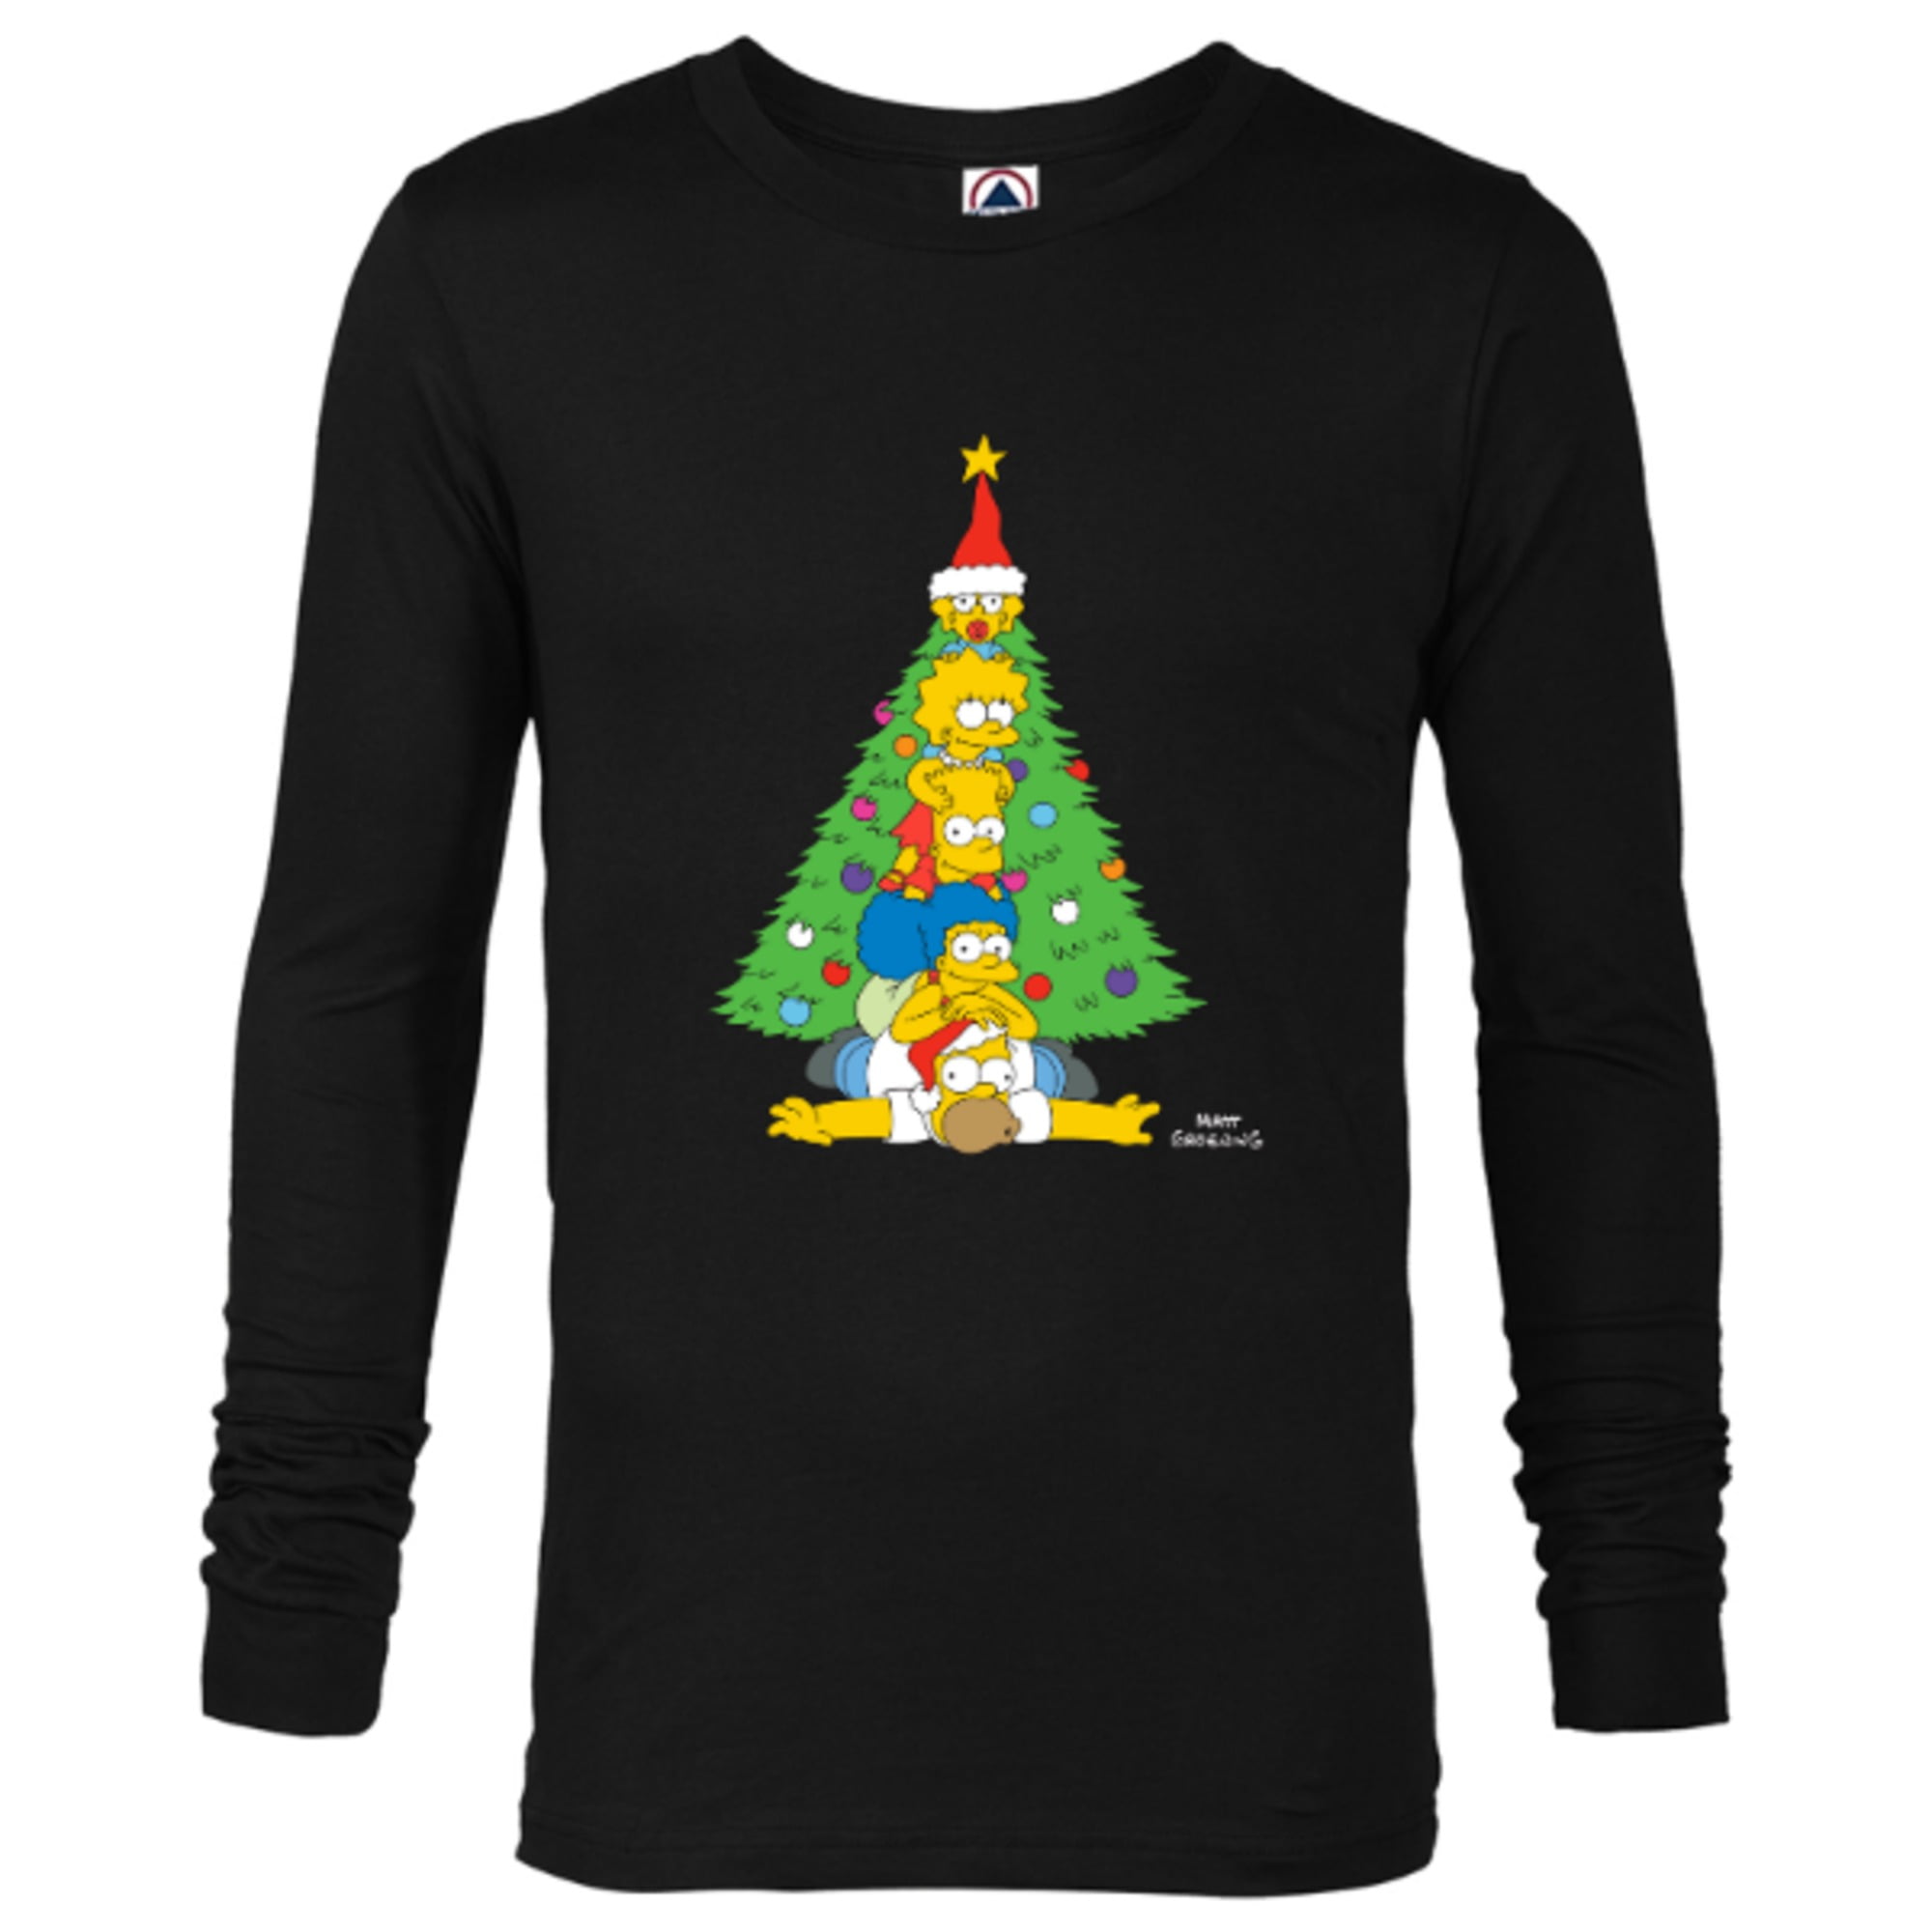 The Simpsons Men - – Customized-Black Sleeve Tree Long Family T-Shirt Christmas for Holiday